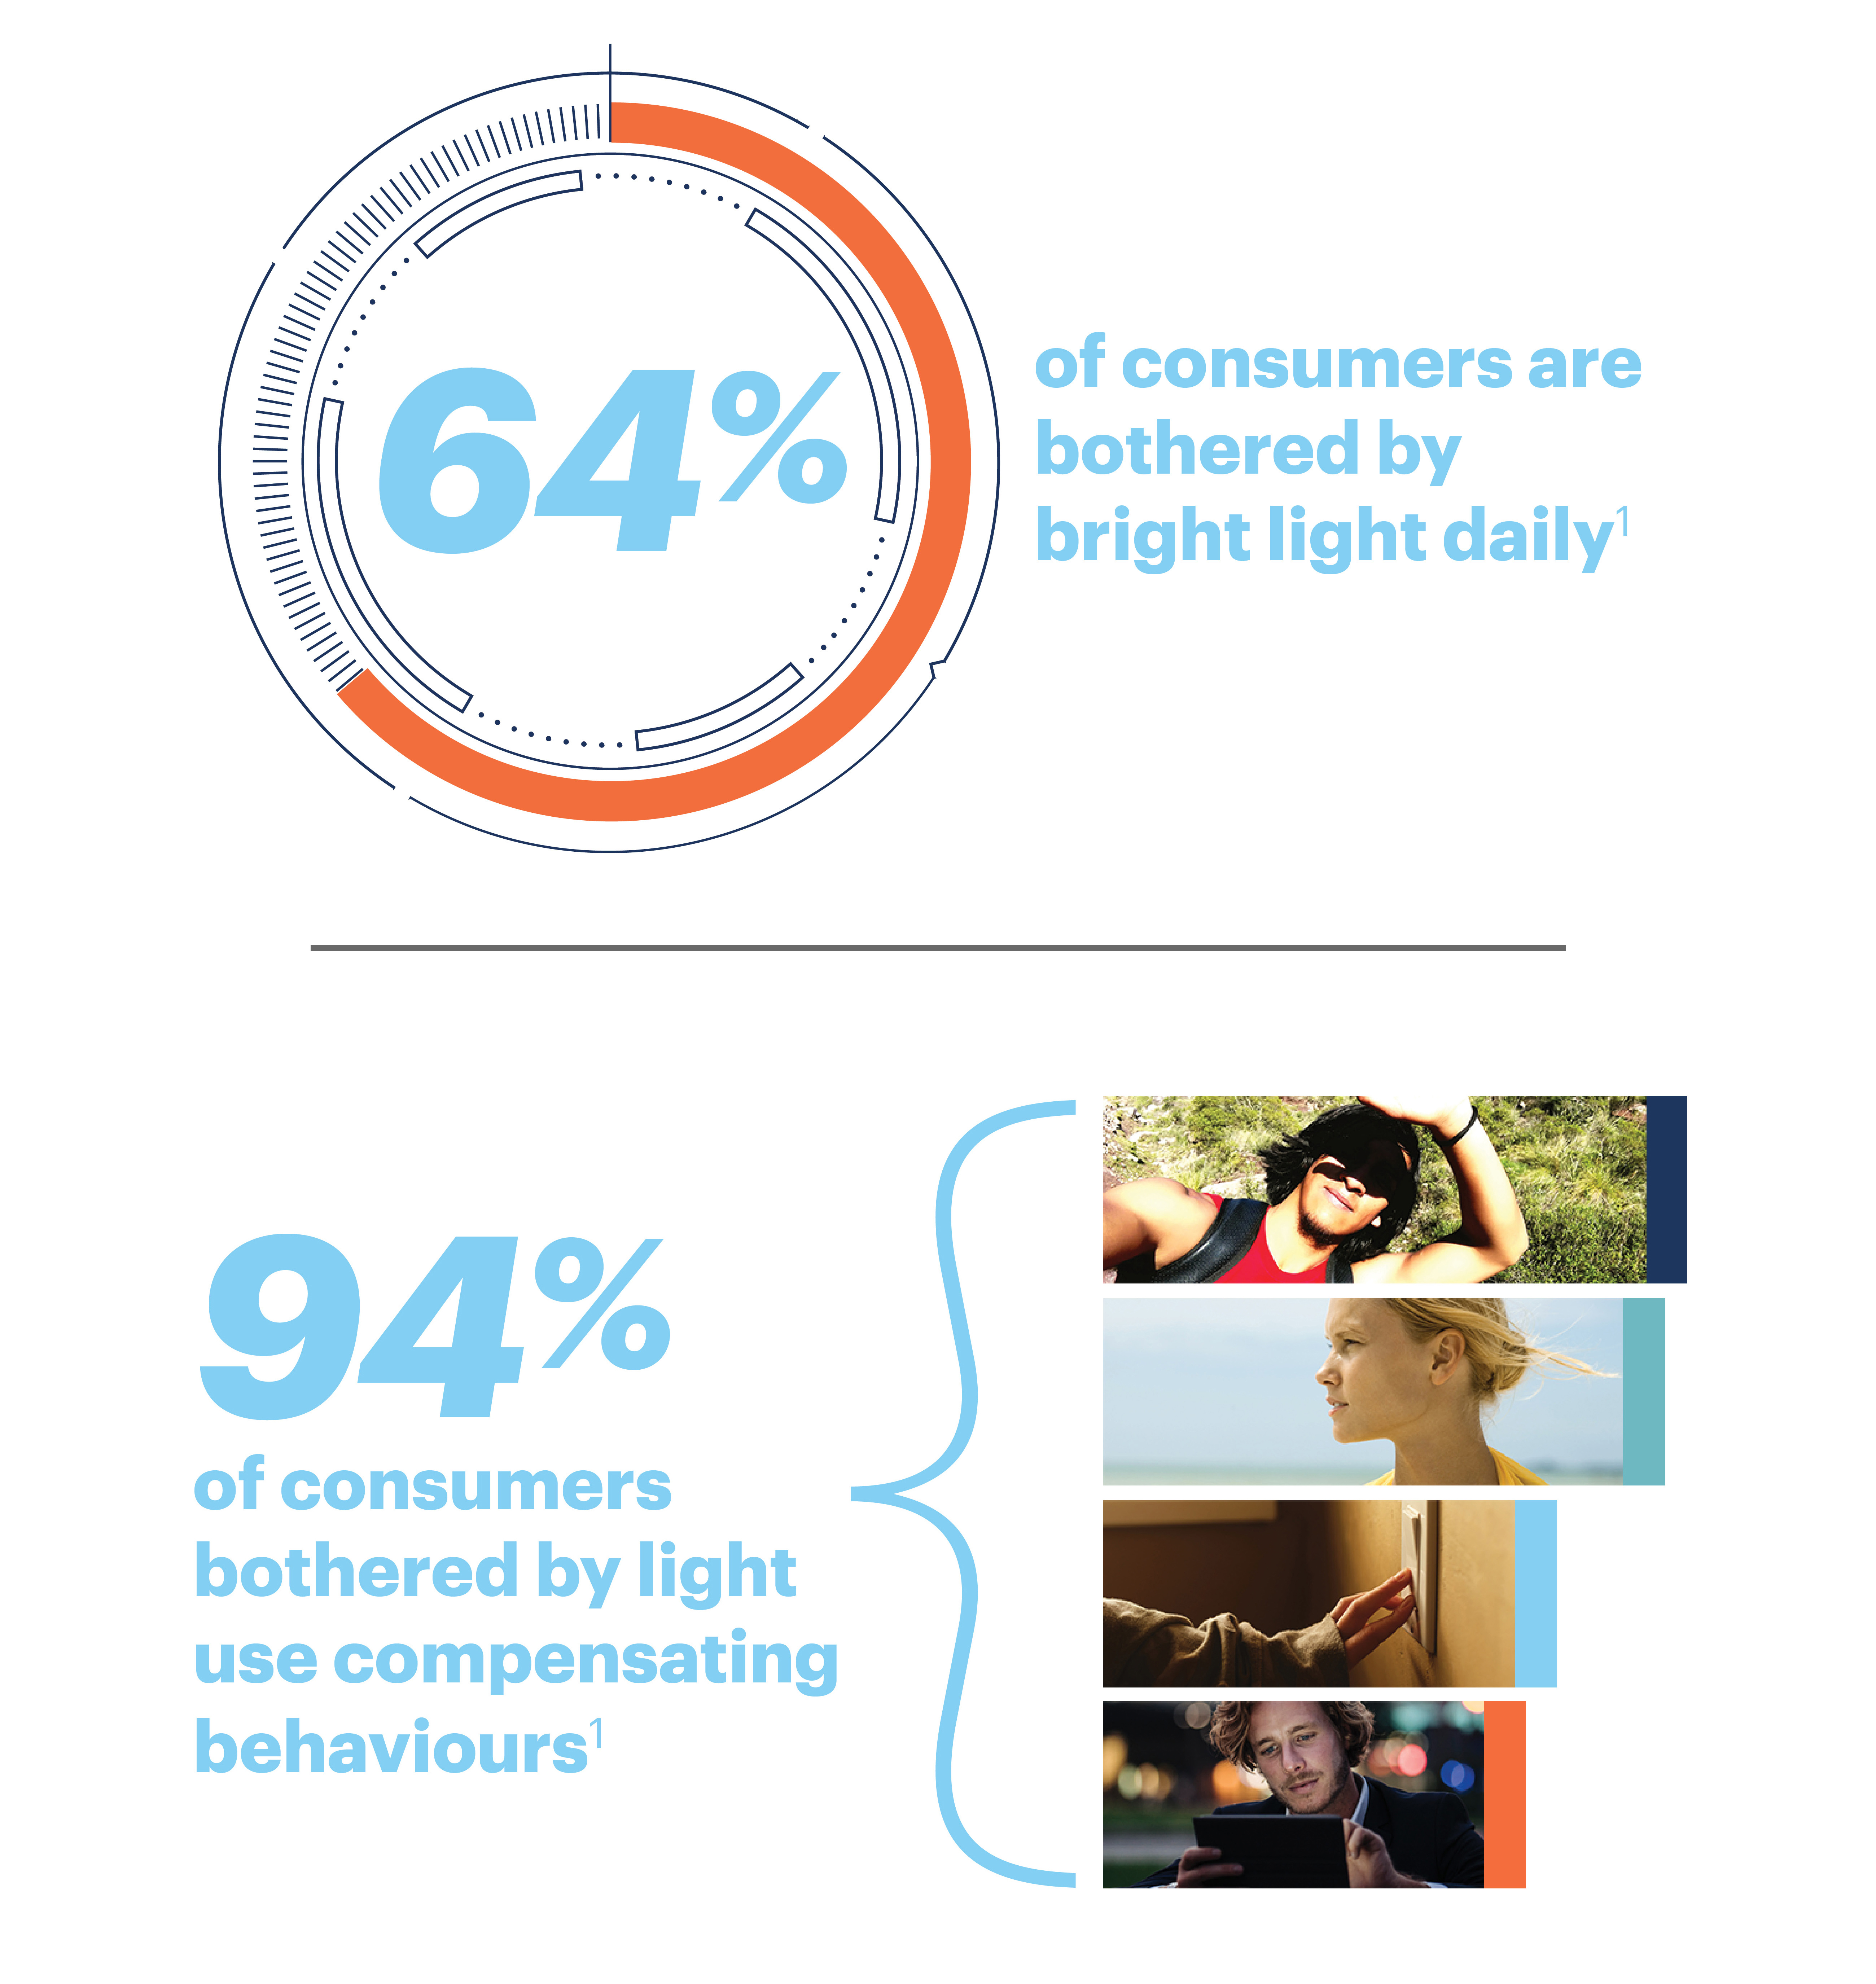 64% of consumers are bothered by bright light daily.1 94% of consumers bothered by light use compensating behaviors.1